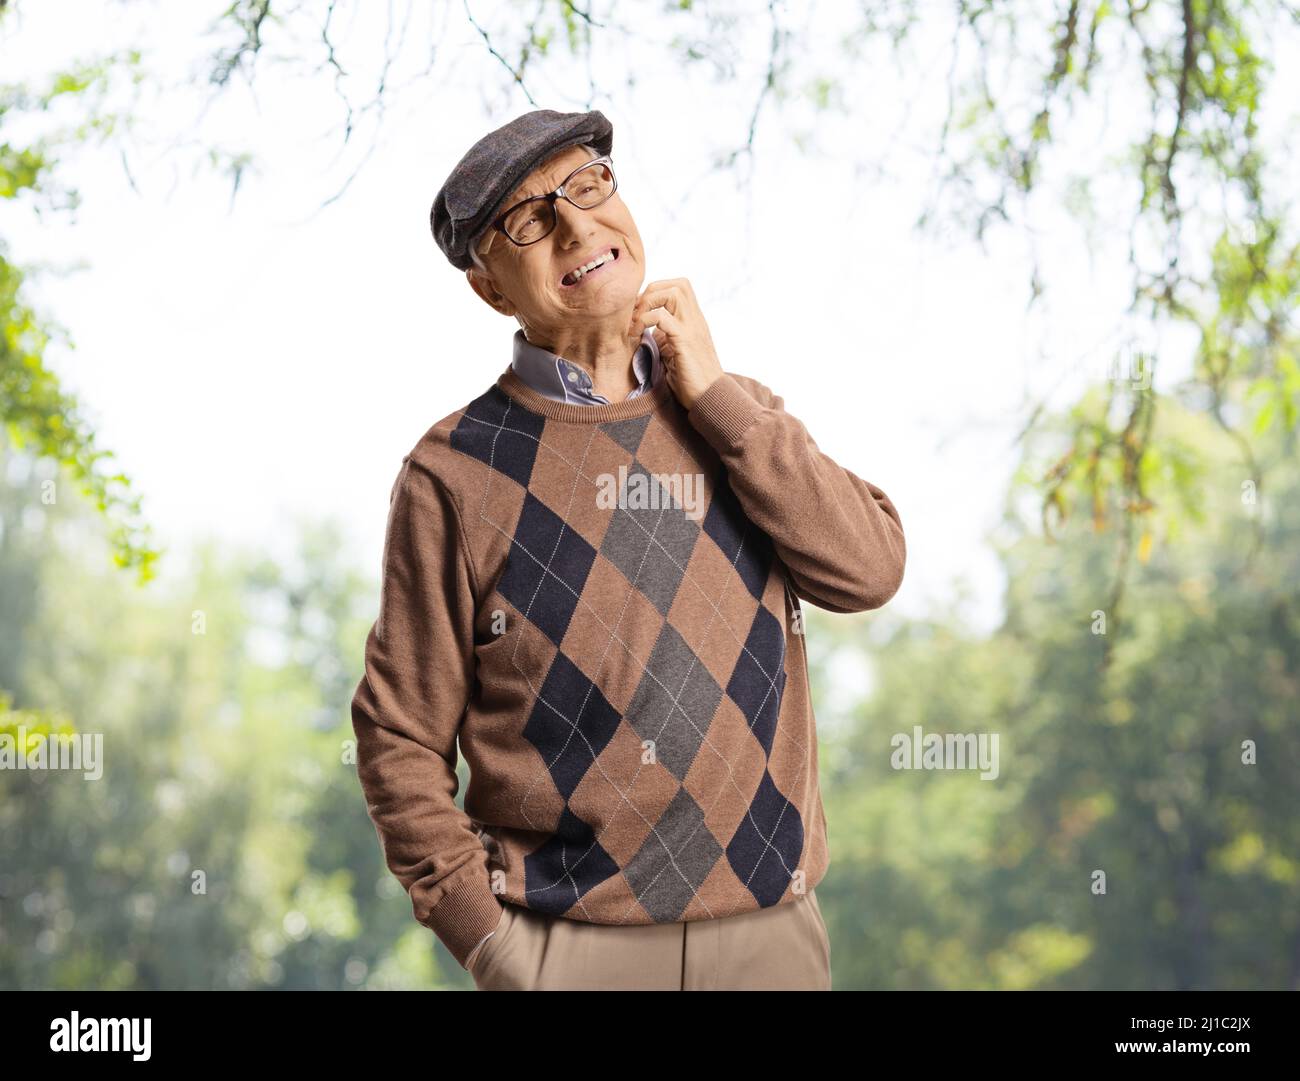 Elderly man itching his neck in a park with trees Stock Photo